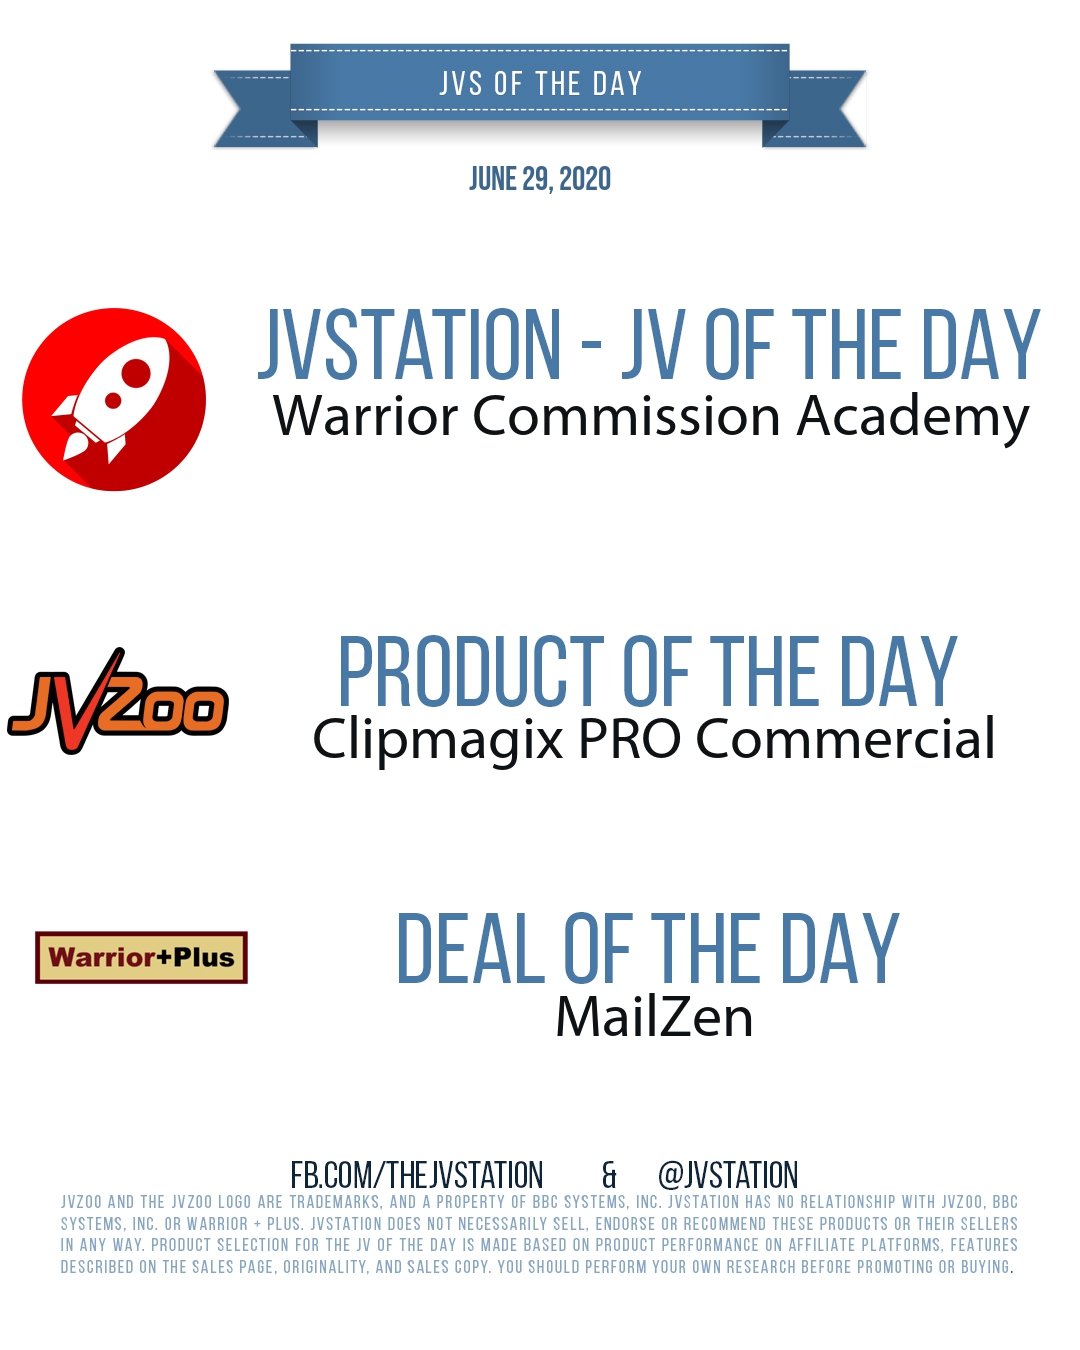 JVs of the day - June 29, 2020